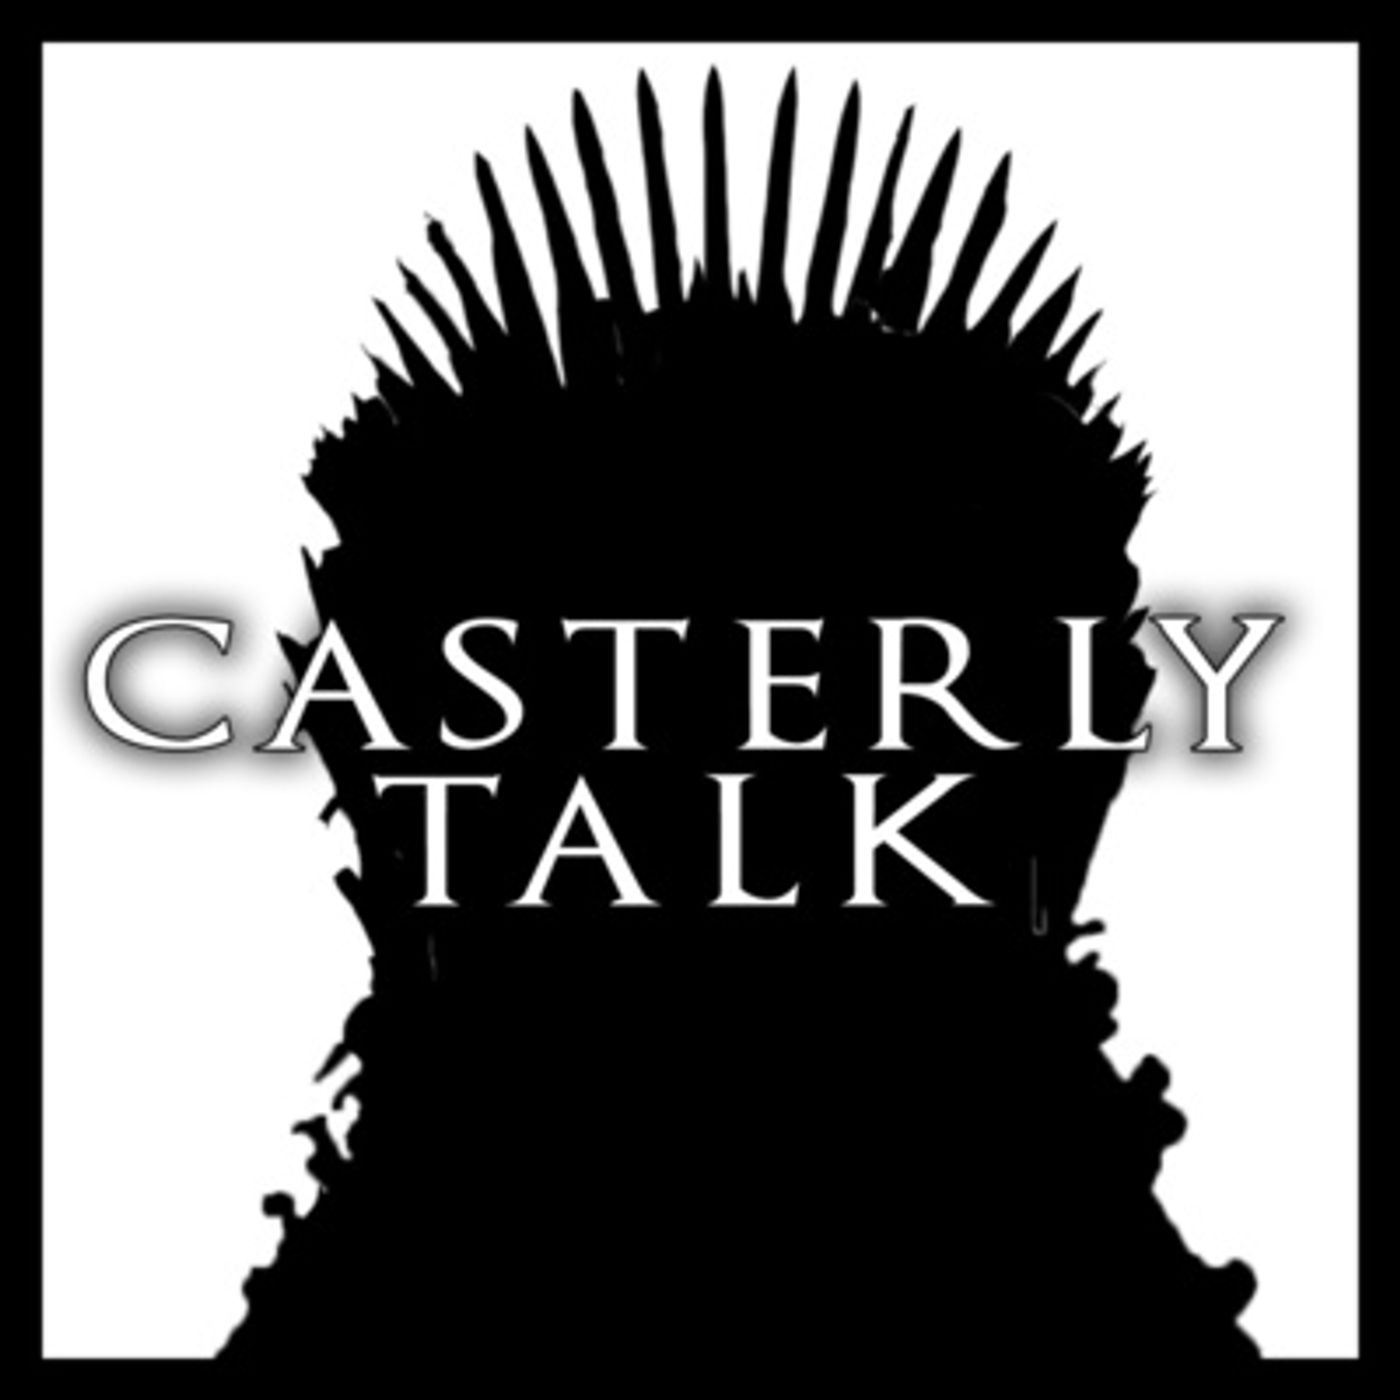 OATHKEEPER - Game of Thrones Rewatch - Casterly Talk - EP 119